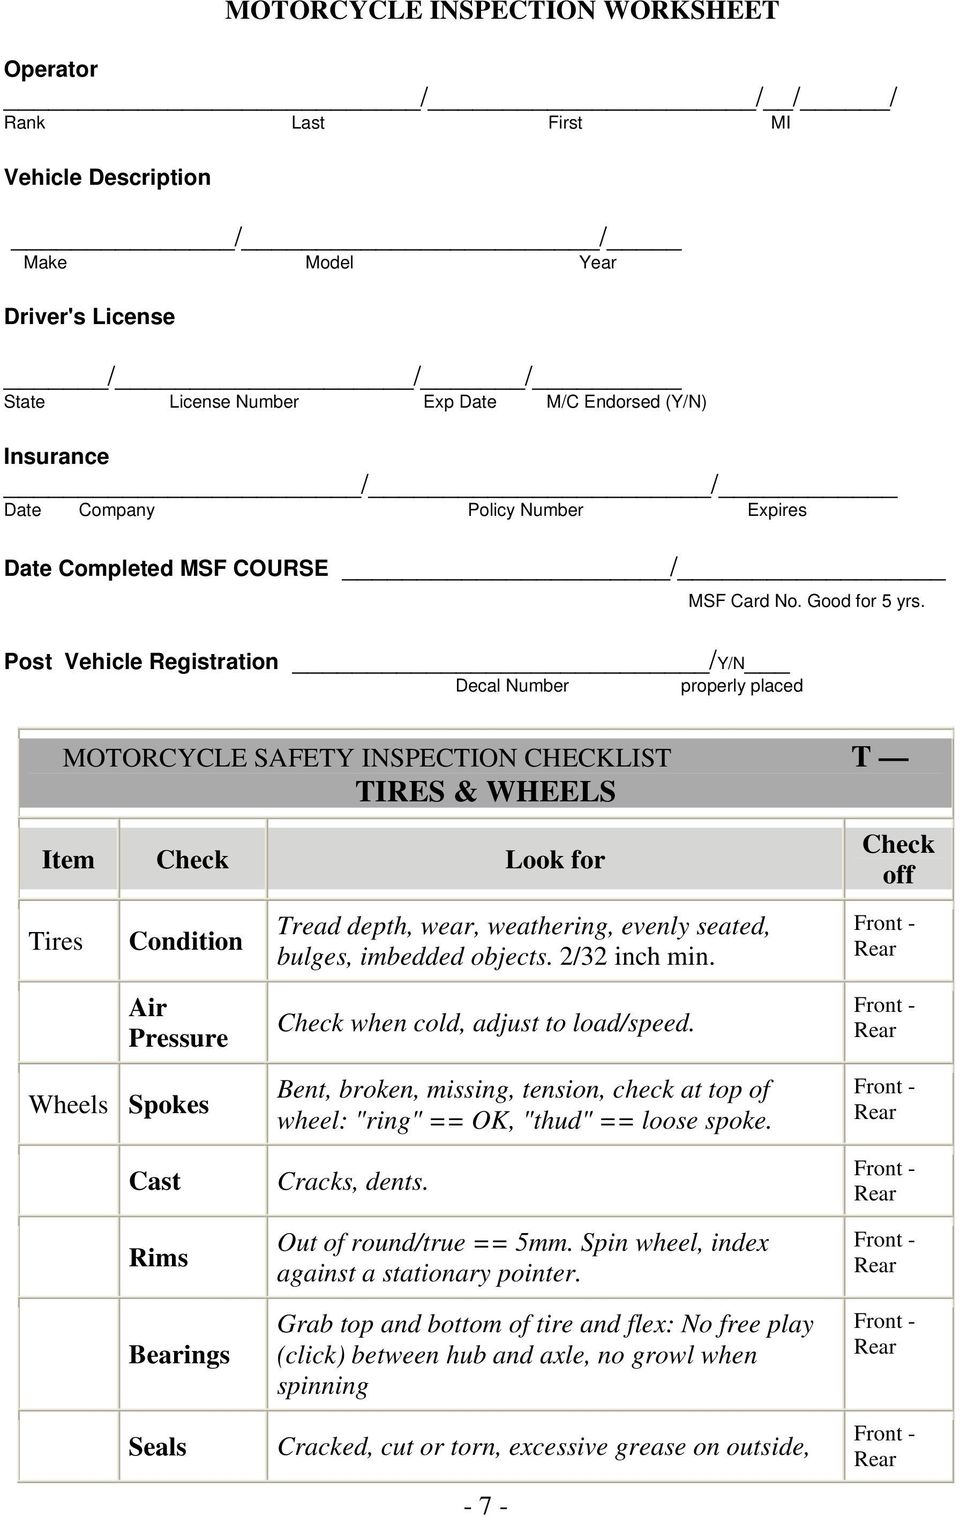 Post Vehicle Registration /Y/N Decal Number properly placed MOTORCYCLE SAFETY INSPECTION CHECKLIST T TIRES & WHEELS Item Look for Tires Tread depth, wear, weathering, evenly seated, bulges, imbedded